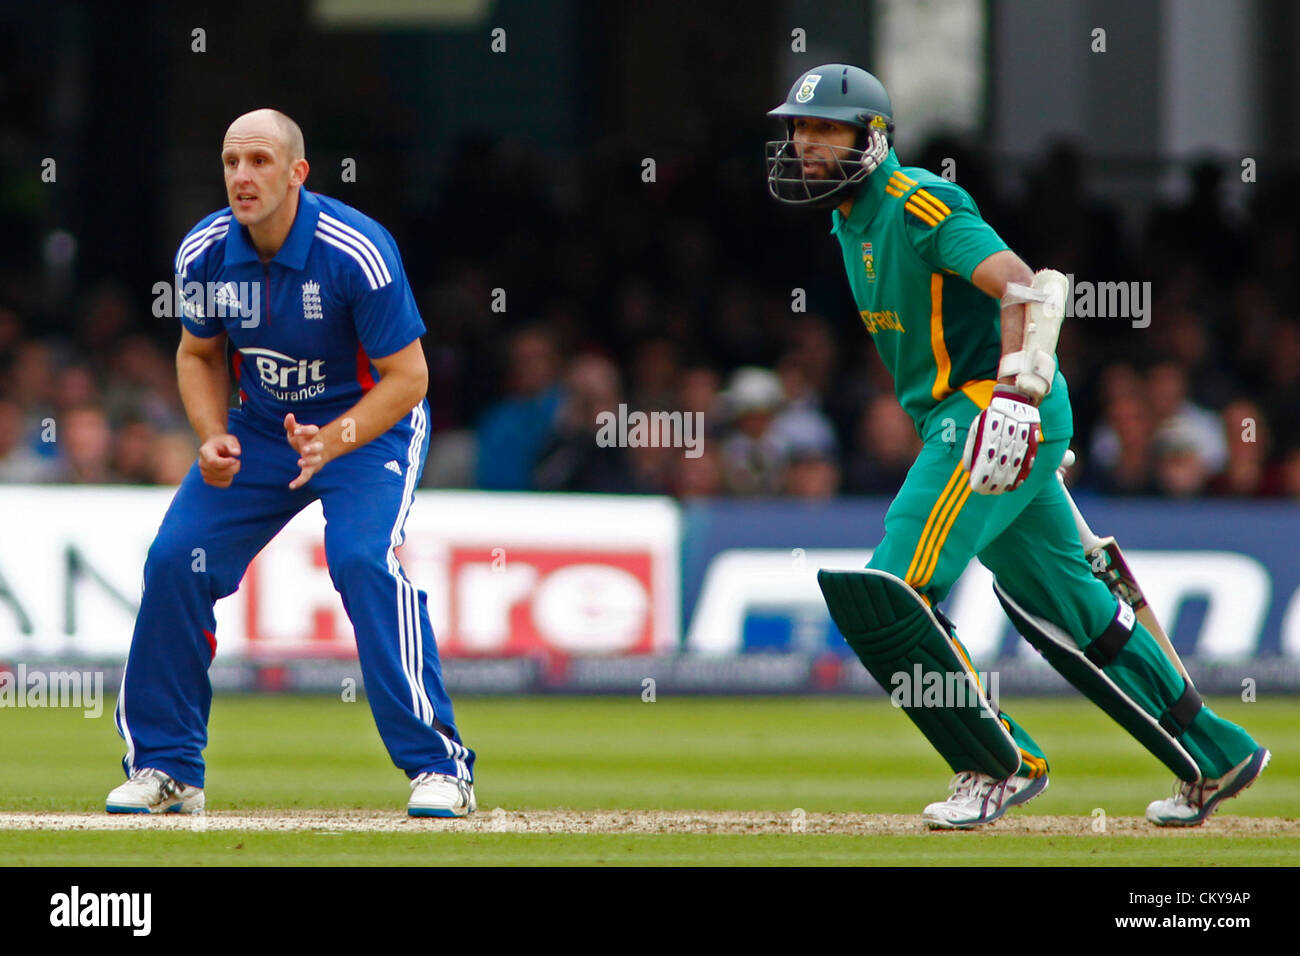 02/09/2012 London, England. England's James Tredwell during the 3rd Nat West one day international cricket match between  England and South Africa and played at Lords Cricket Ground: Mandatory credit: Mitchell Gunn Stock Photo